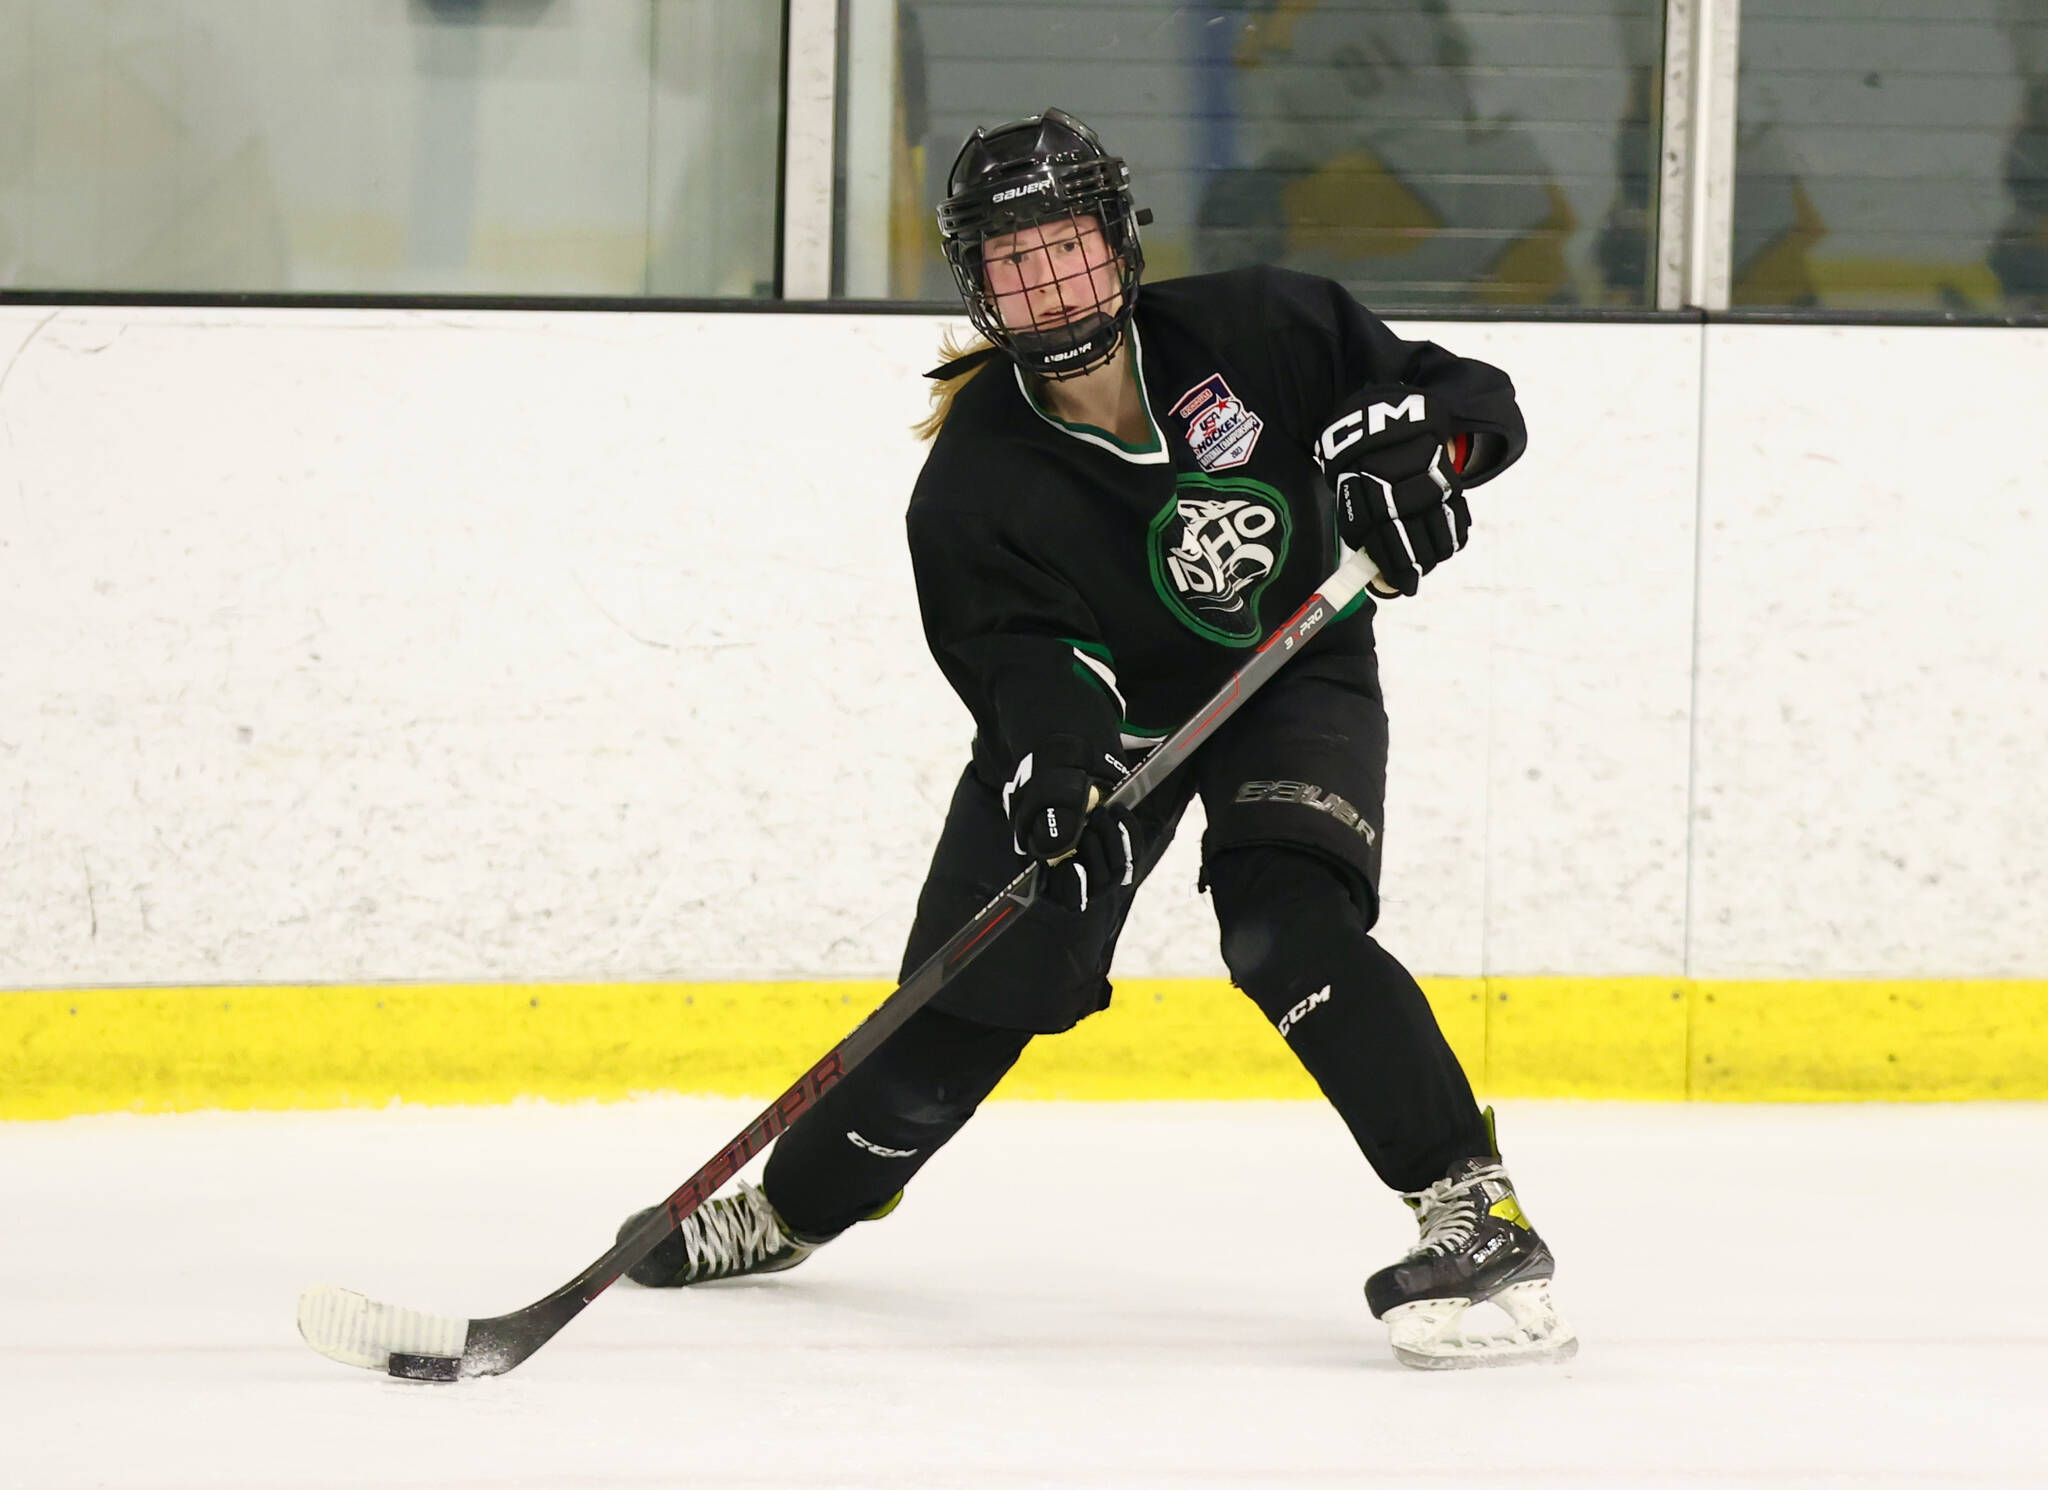 Juneau-Douglas High School: Yadaa.at Kalé senior Anna Dale, shown in action for the Idaho Vipers at the USAH Girls U19 Nationals, signed a letter of intent Monday to play hockey for Lebanon Valley College in Annville, Pennsylvania. (Photo courtesy Vipers Hockey)